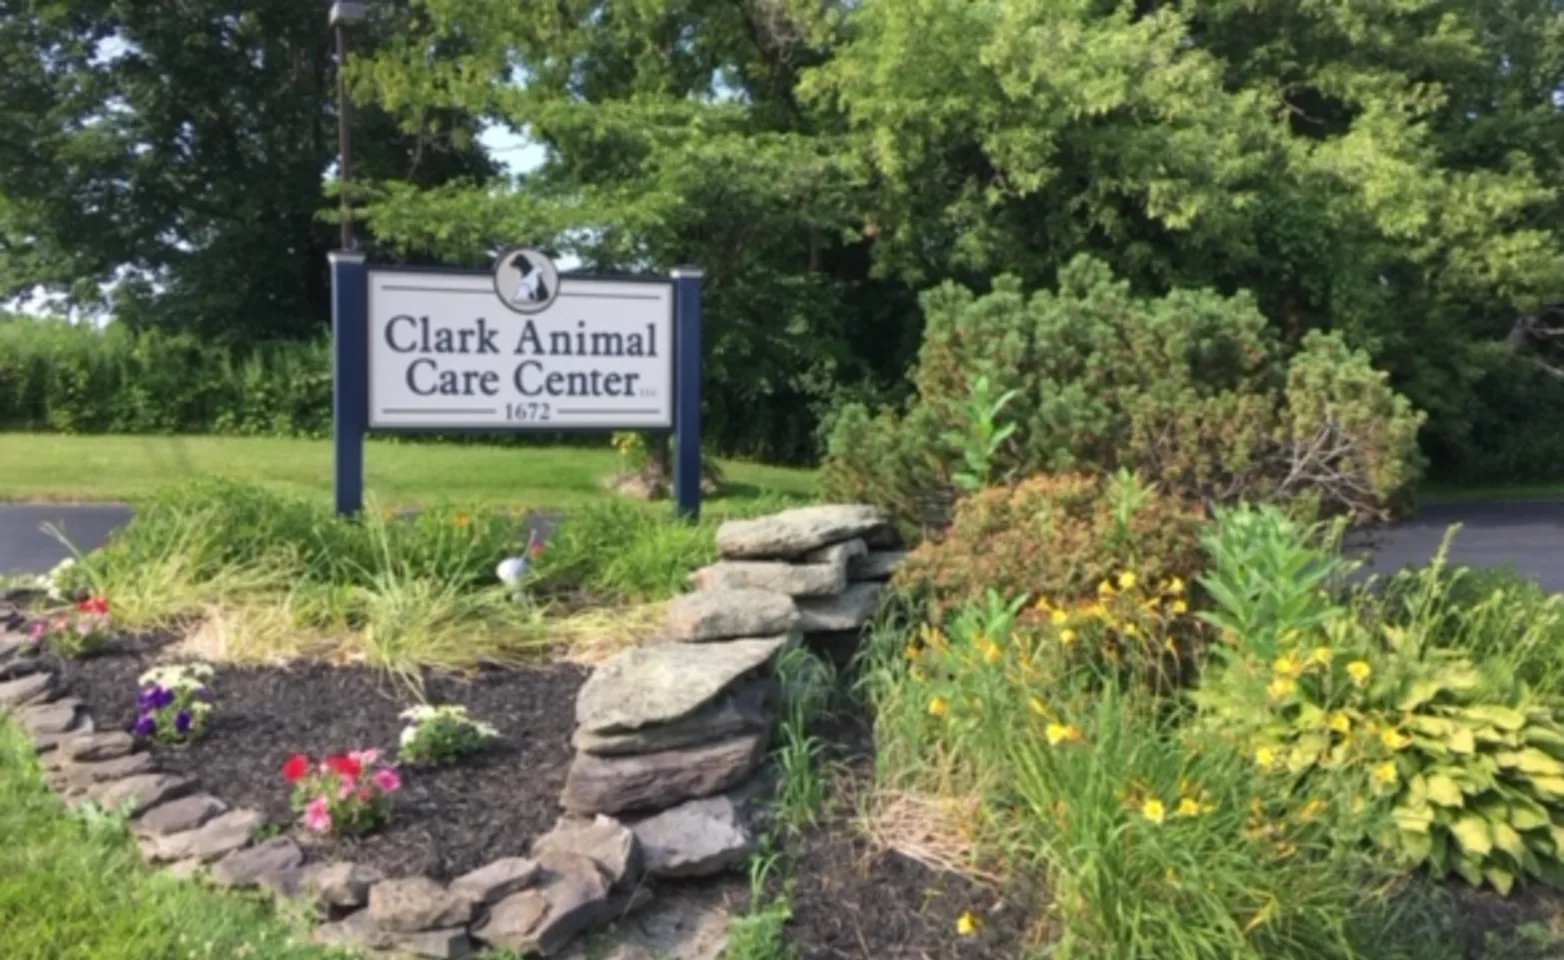 Sign and exterior of Clark Animal Care Center in Penfield